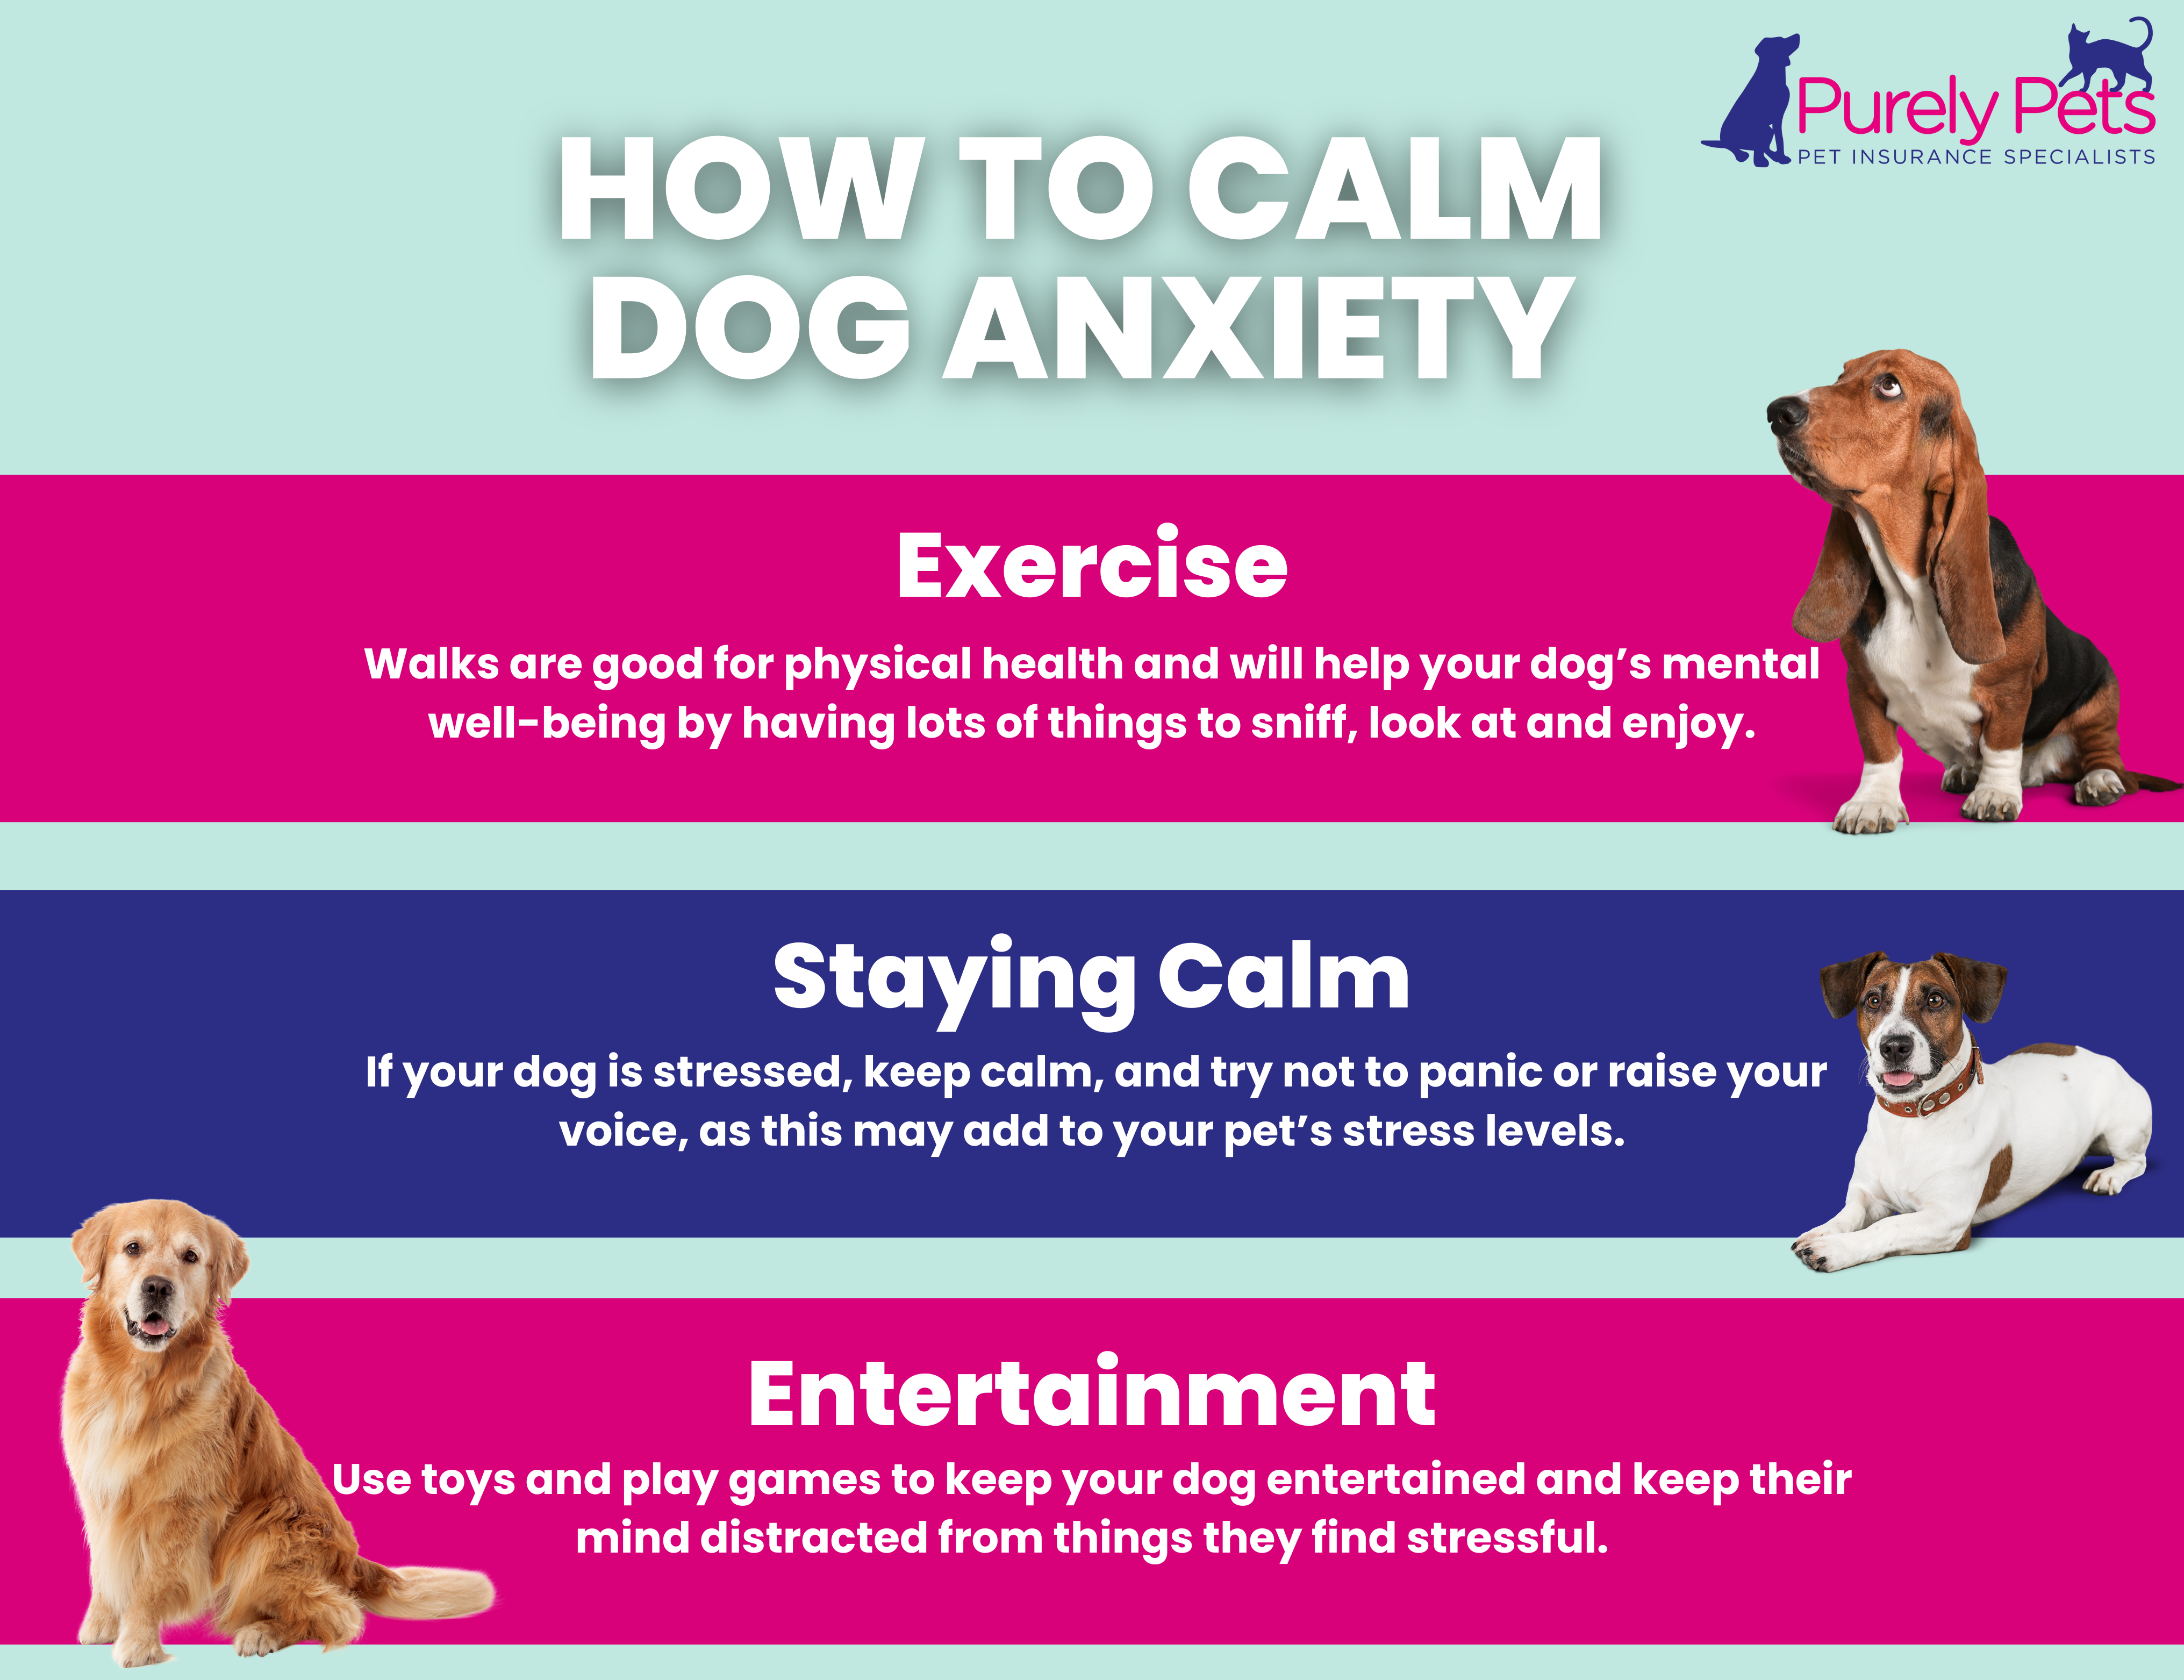 Info-graphic showing three ways to reduce dog anxiety